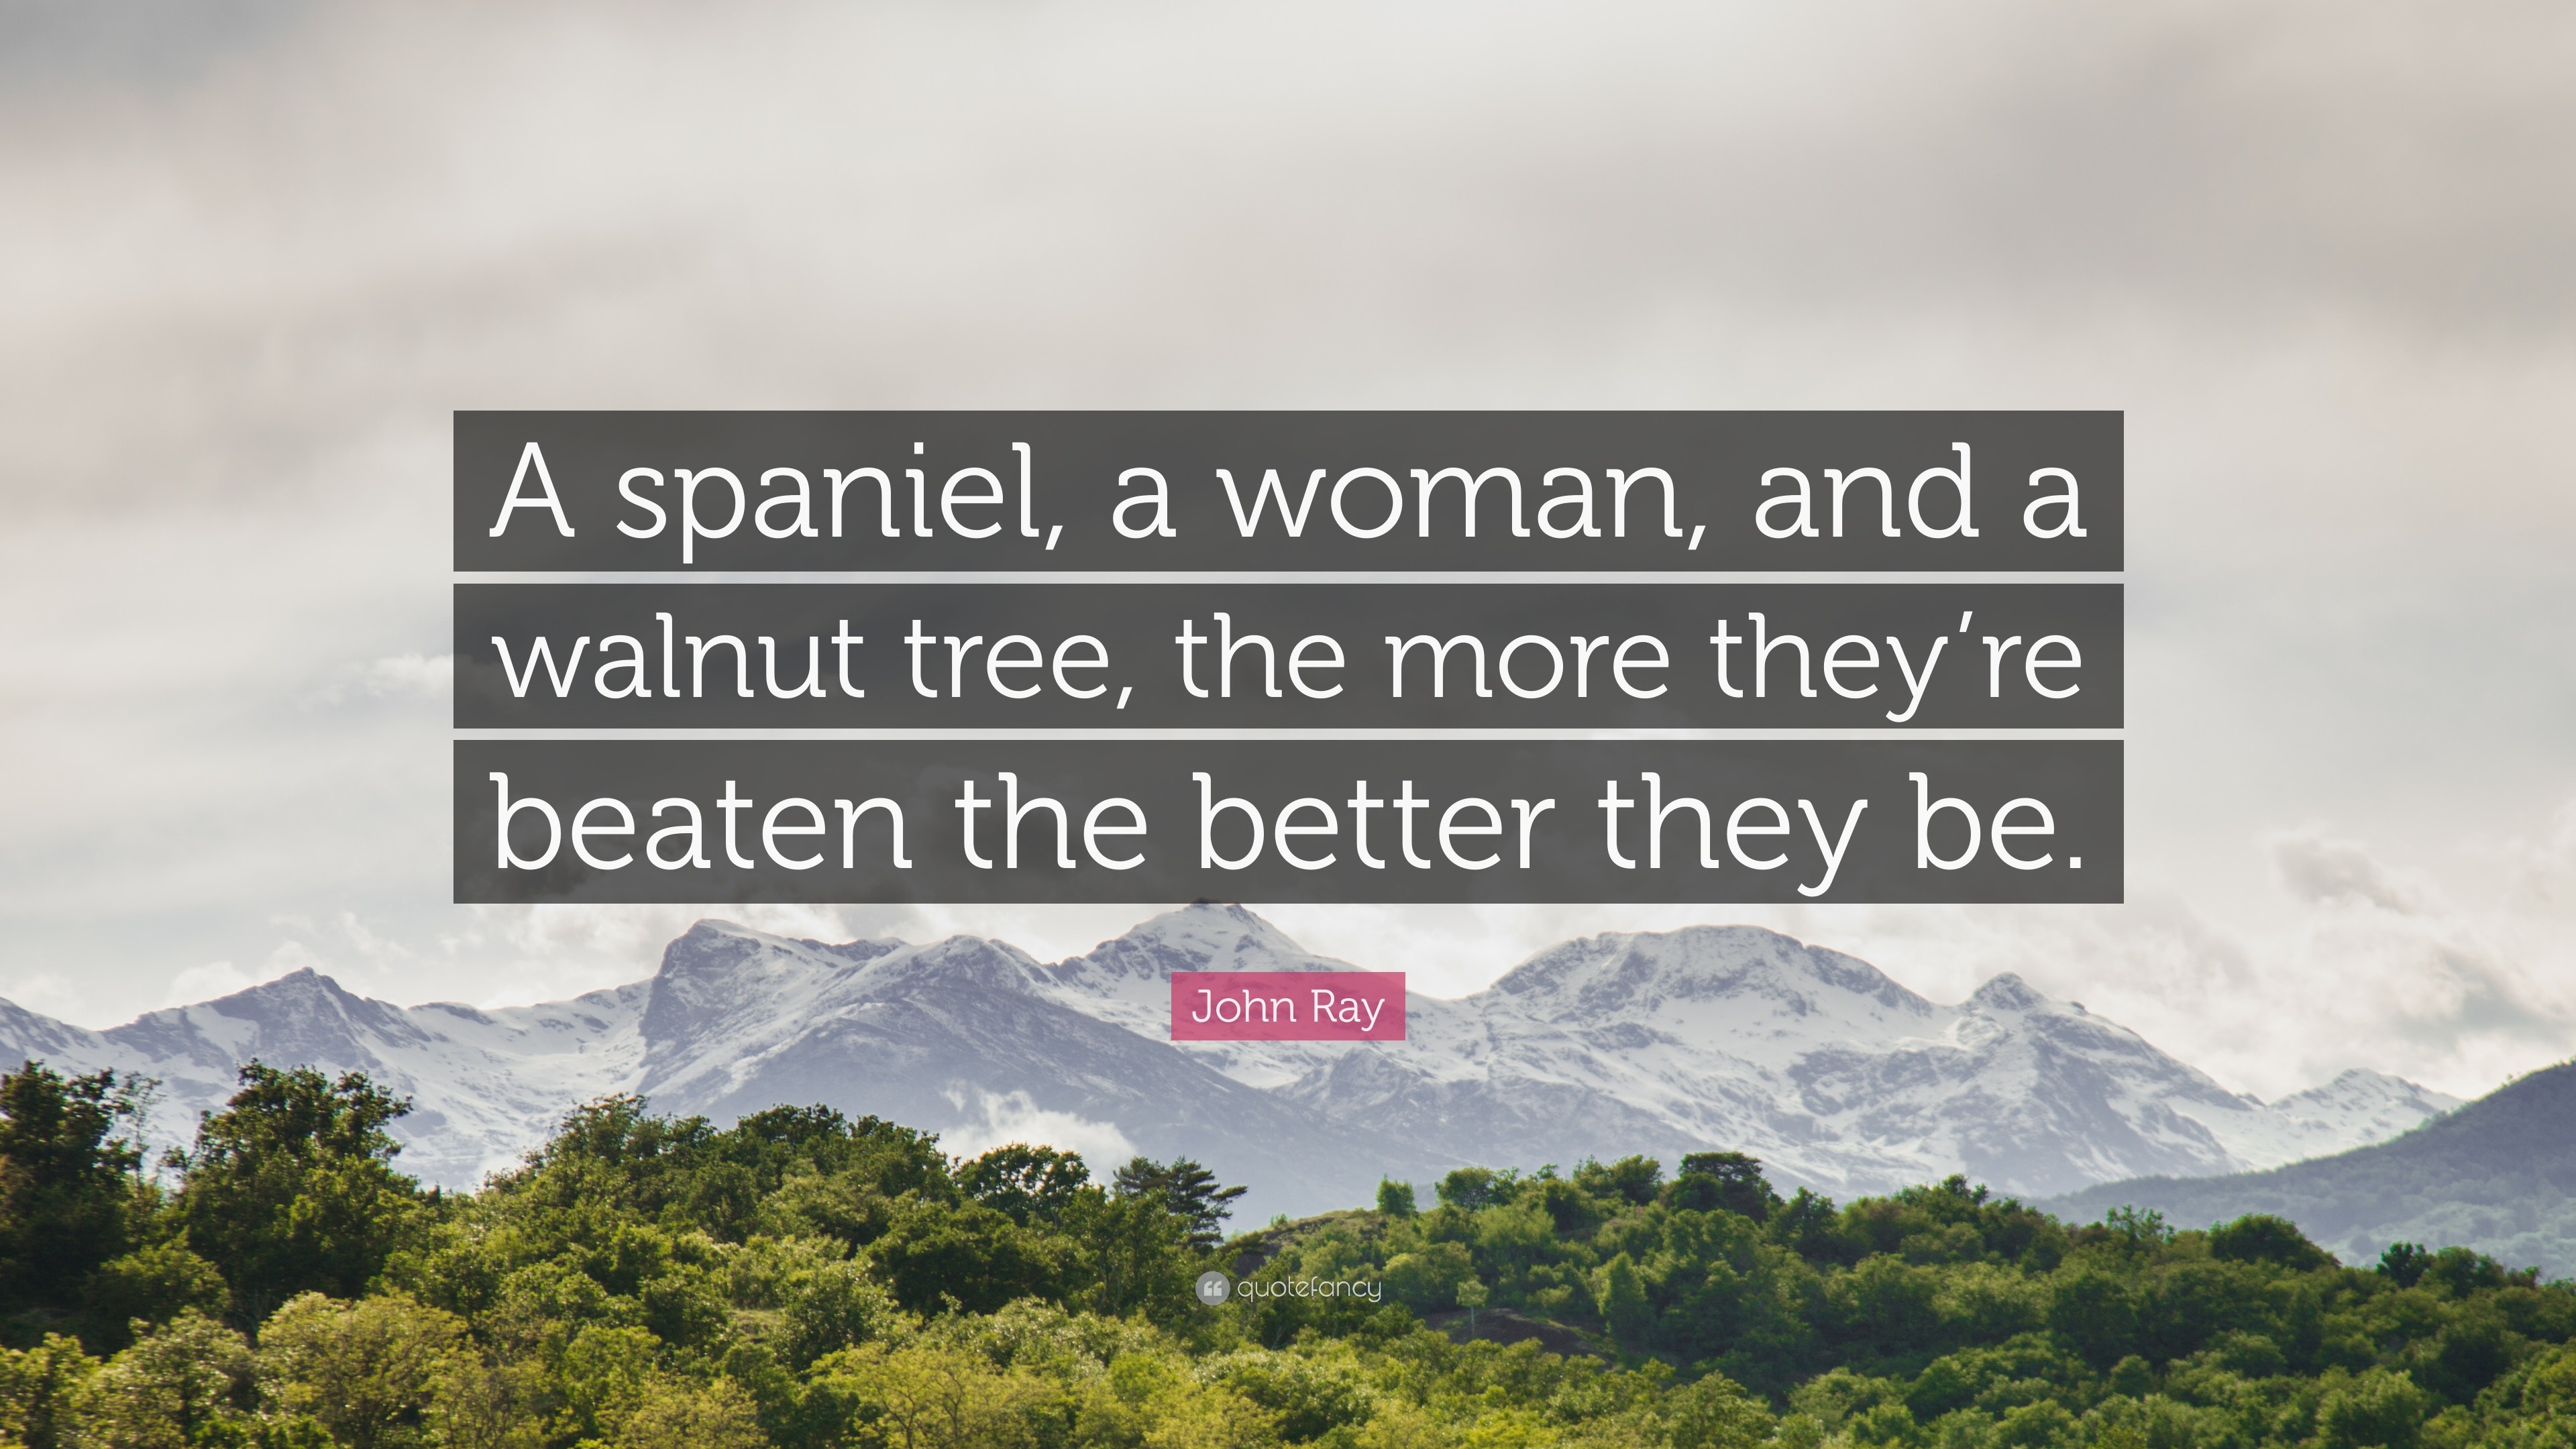 John Ray Quote: “A spaniel, a woman, and a walnut tree, the more they're  beaten